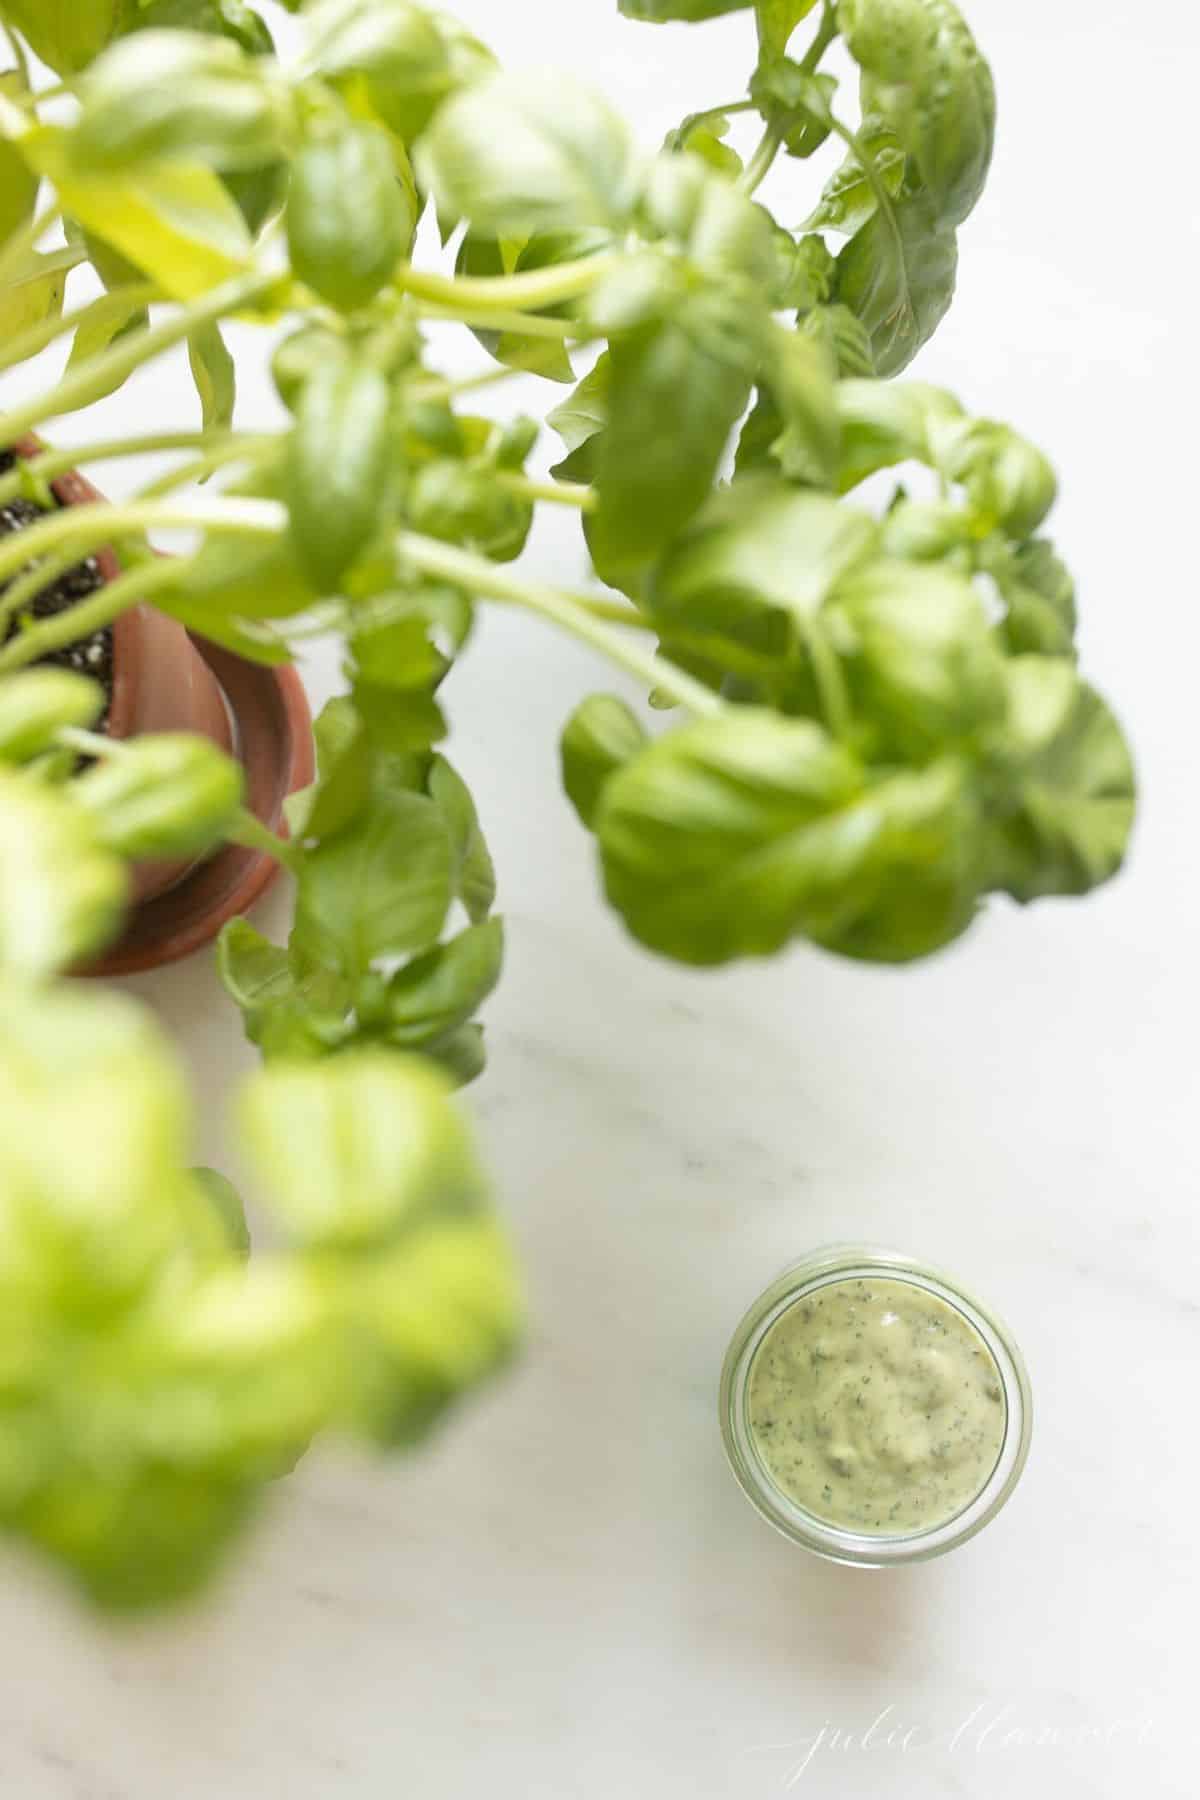 Pesto aioli in a glass jar on a white surface with a basil plant to the side.